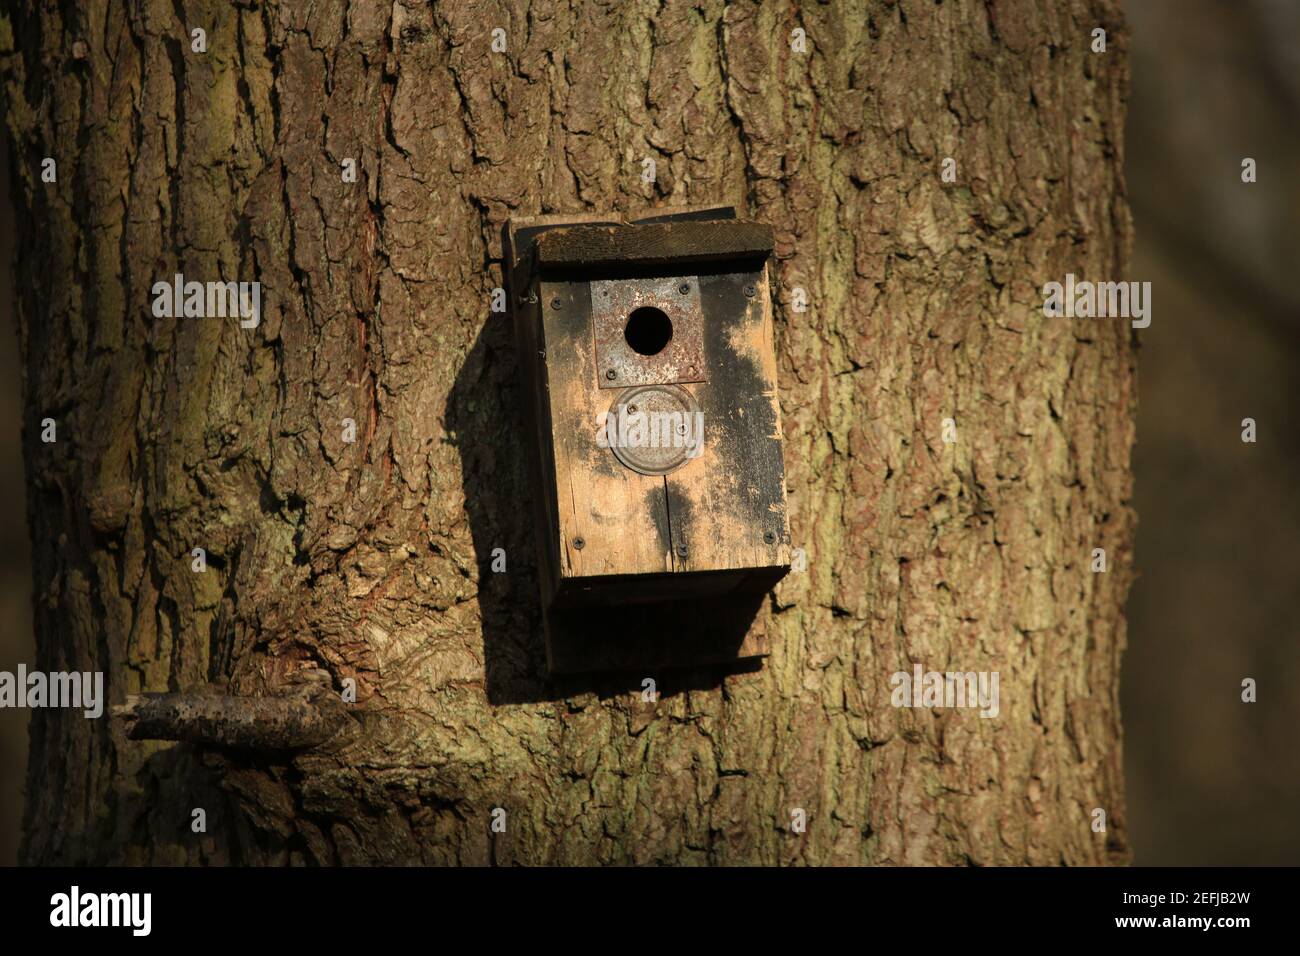 Bird nesting box mounted on a tree in the Wyre forest, Worcestershire, England, UK. Stock Photo